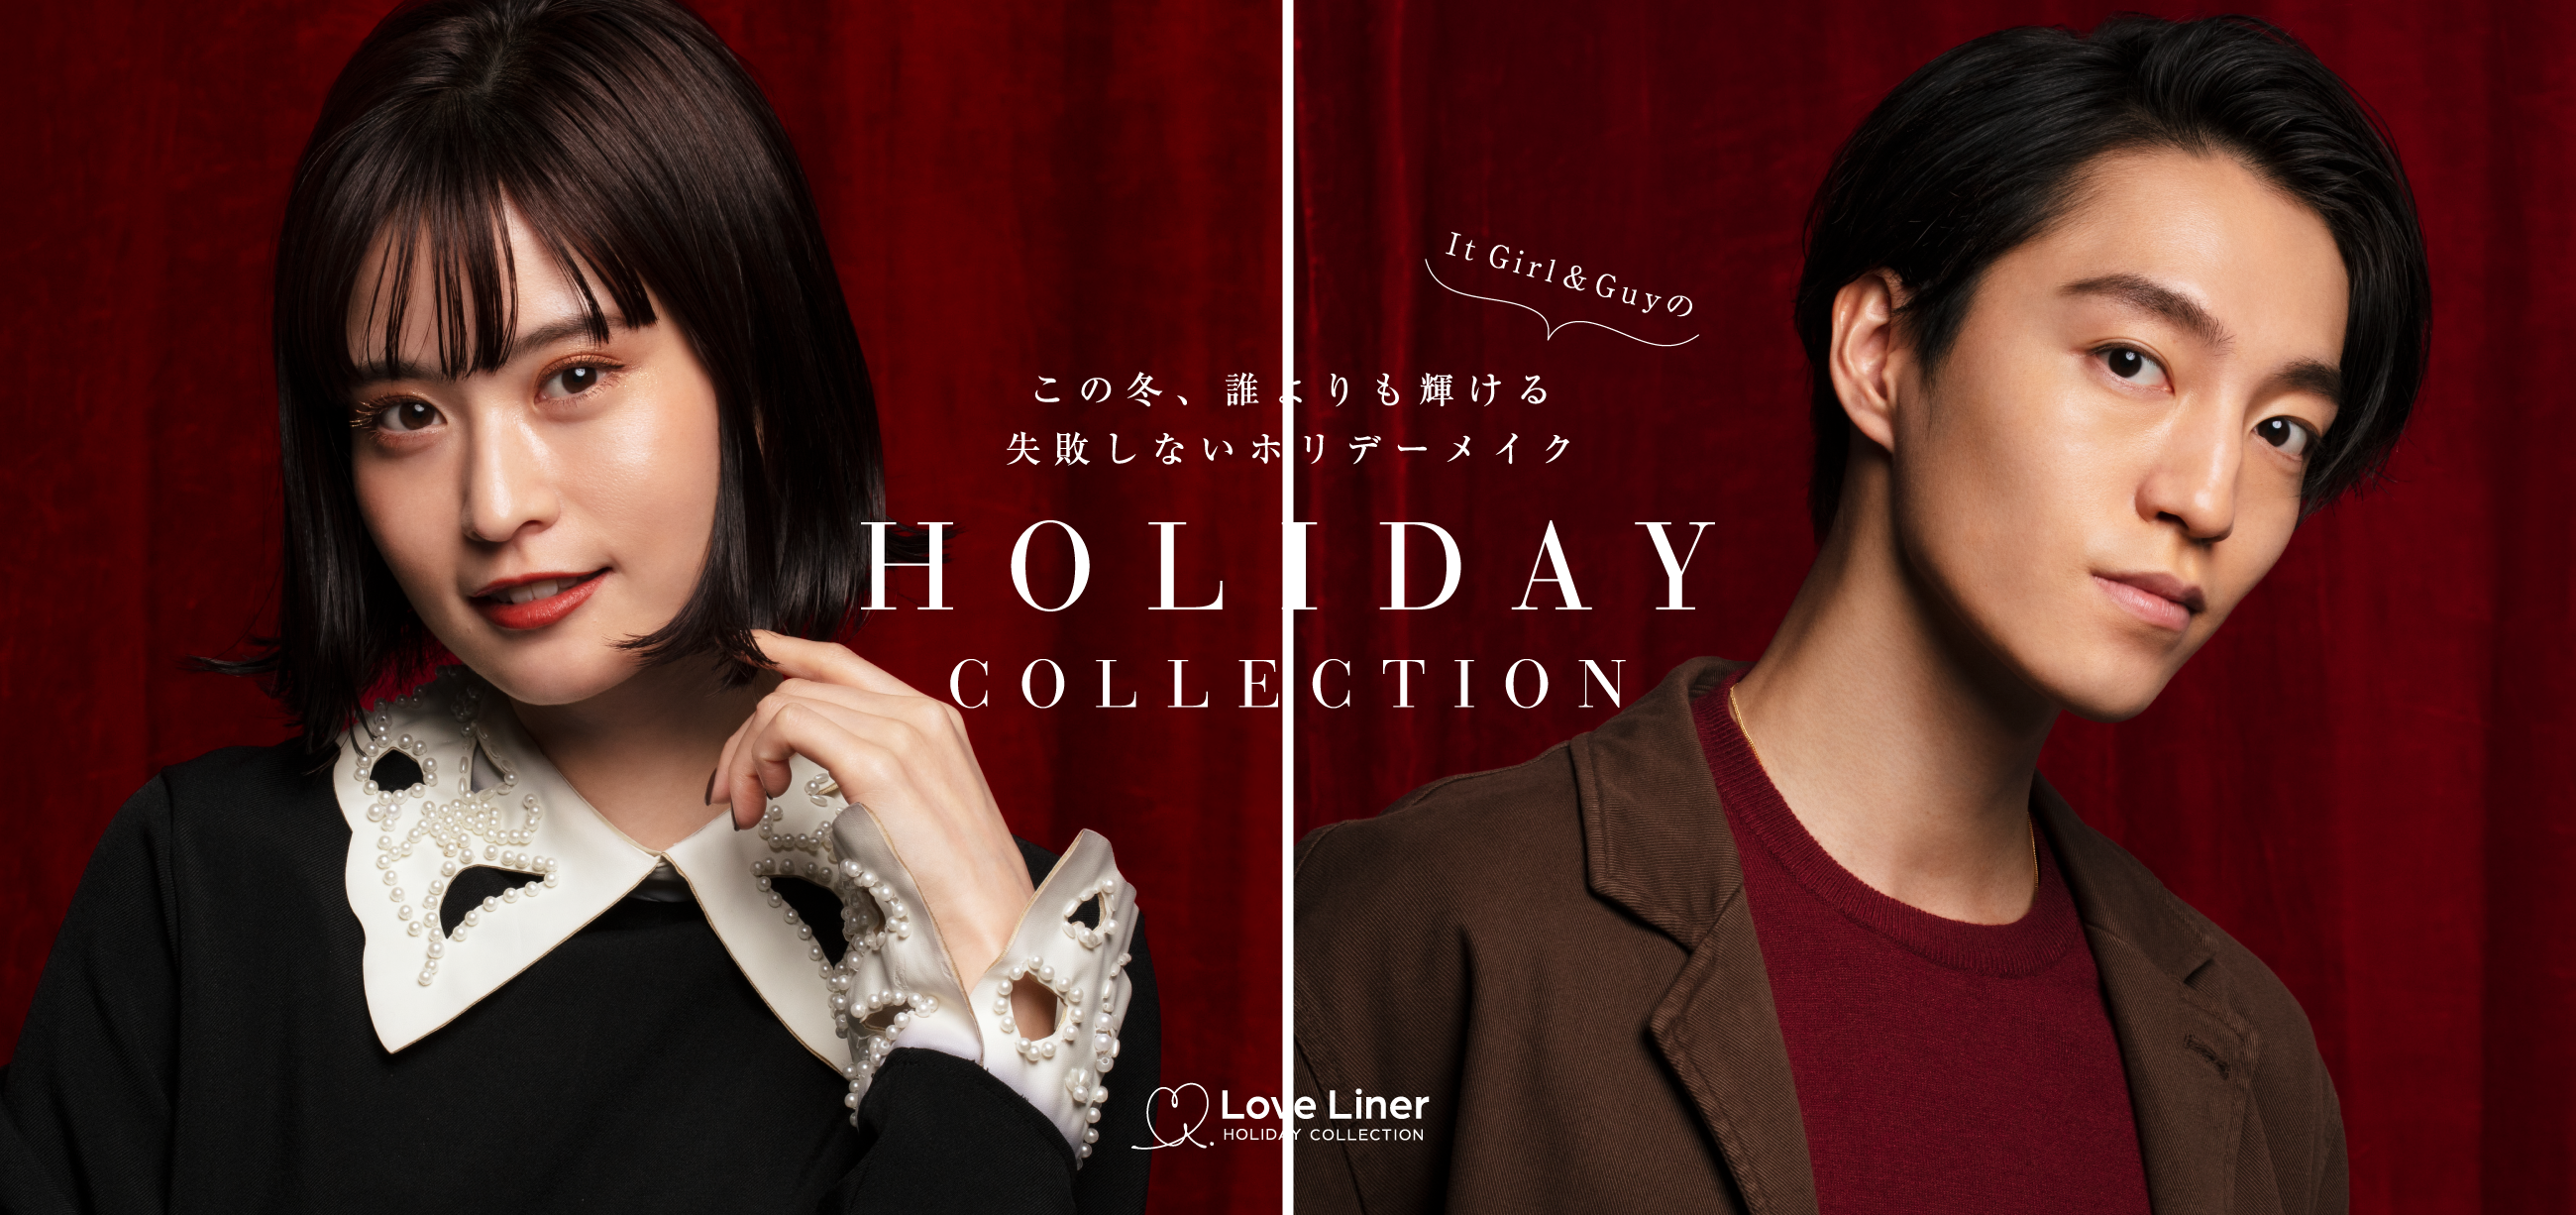 Love Liner HOLIDAY COLLECTION